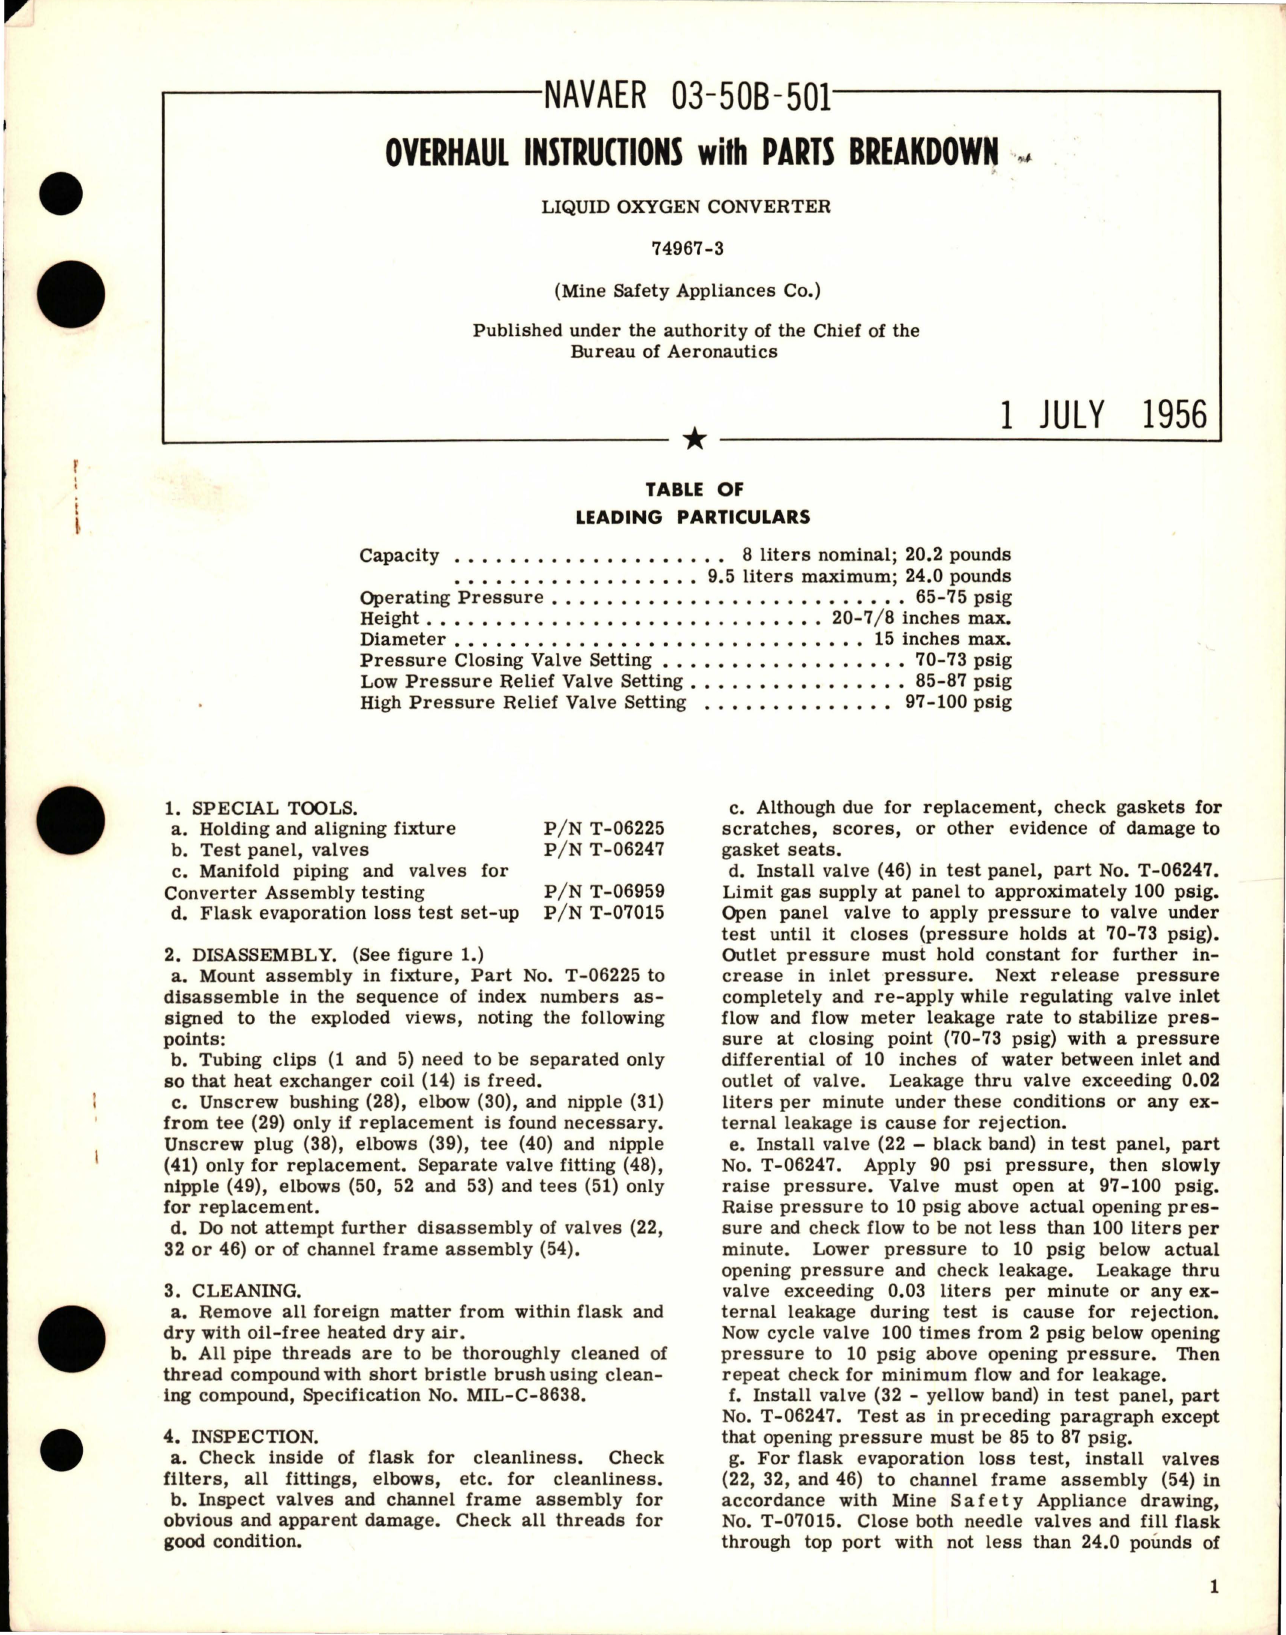 Sample page 1 from AirCorps Library document: Overhaul Instructions with Parts Breakdown for Liquid Oxygen Converter - 74967-3 